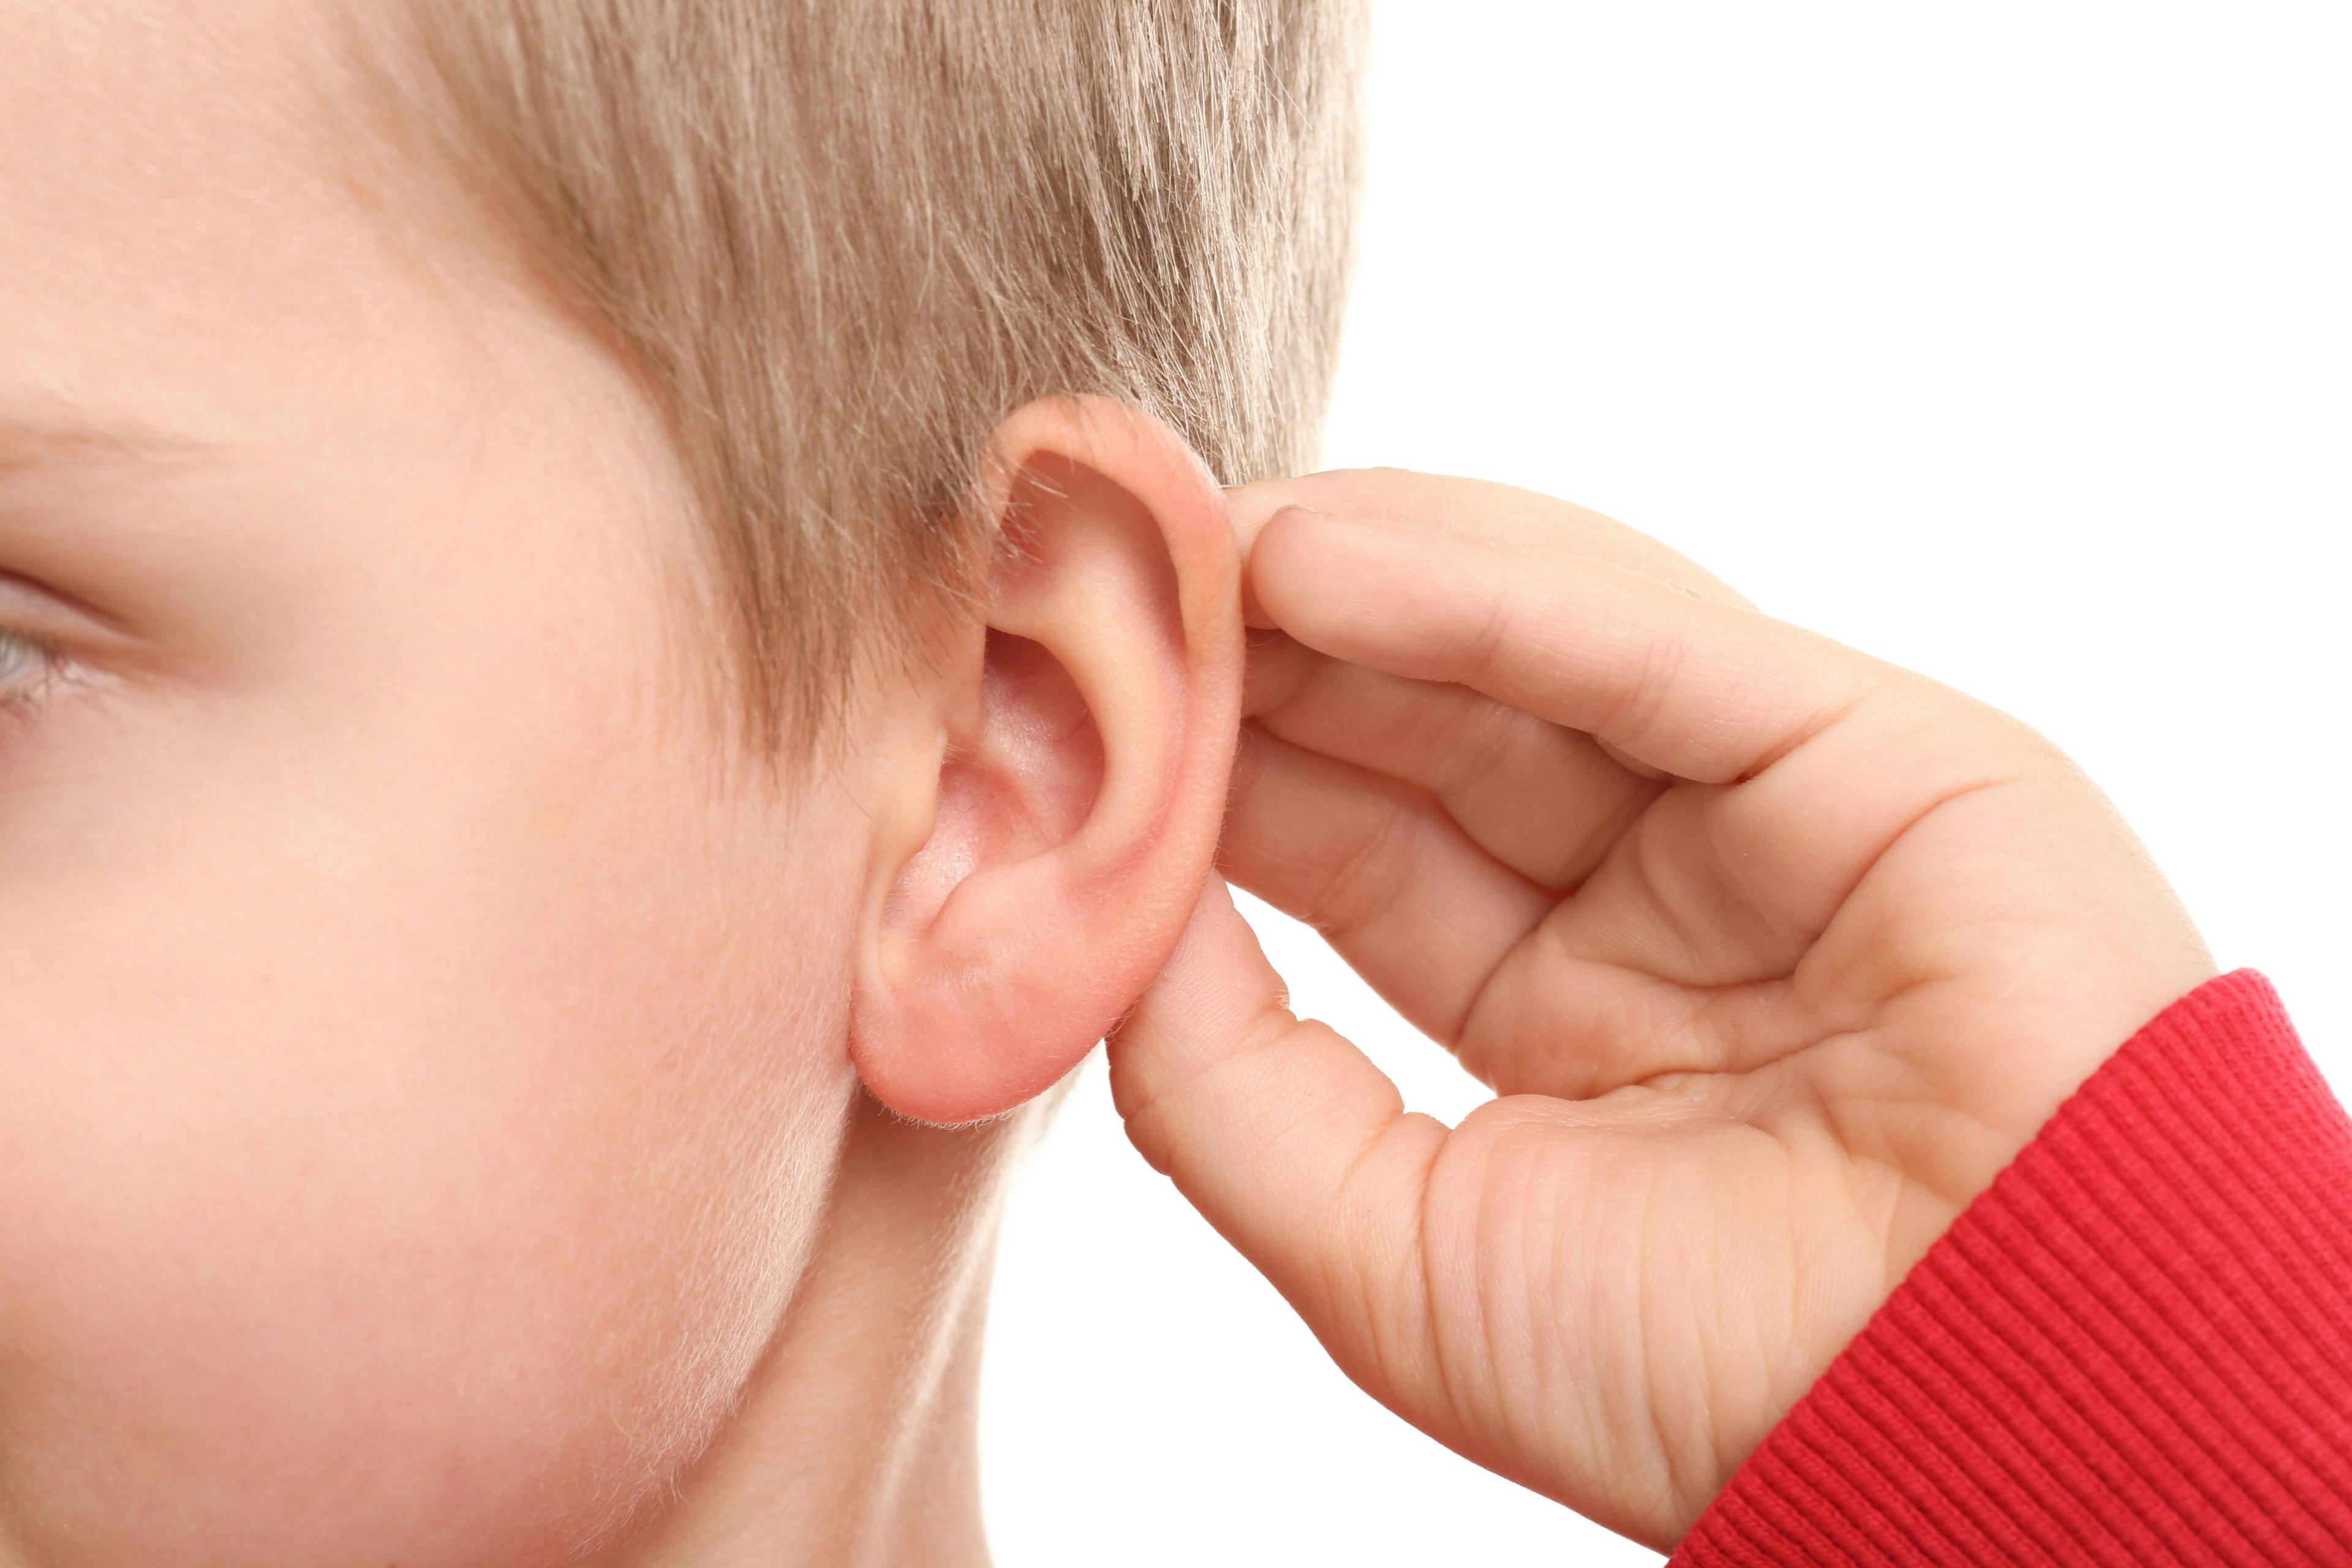 Younger Children May Have Increased Risk for Hearing Loss From Chemotherapy